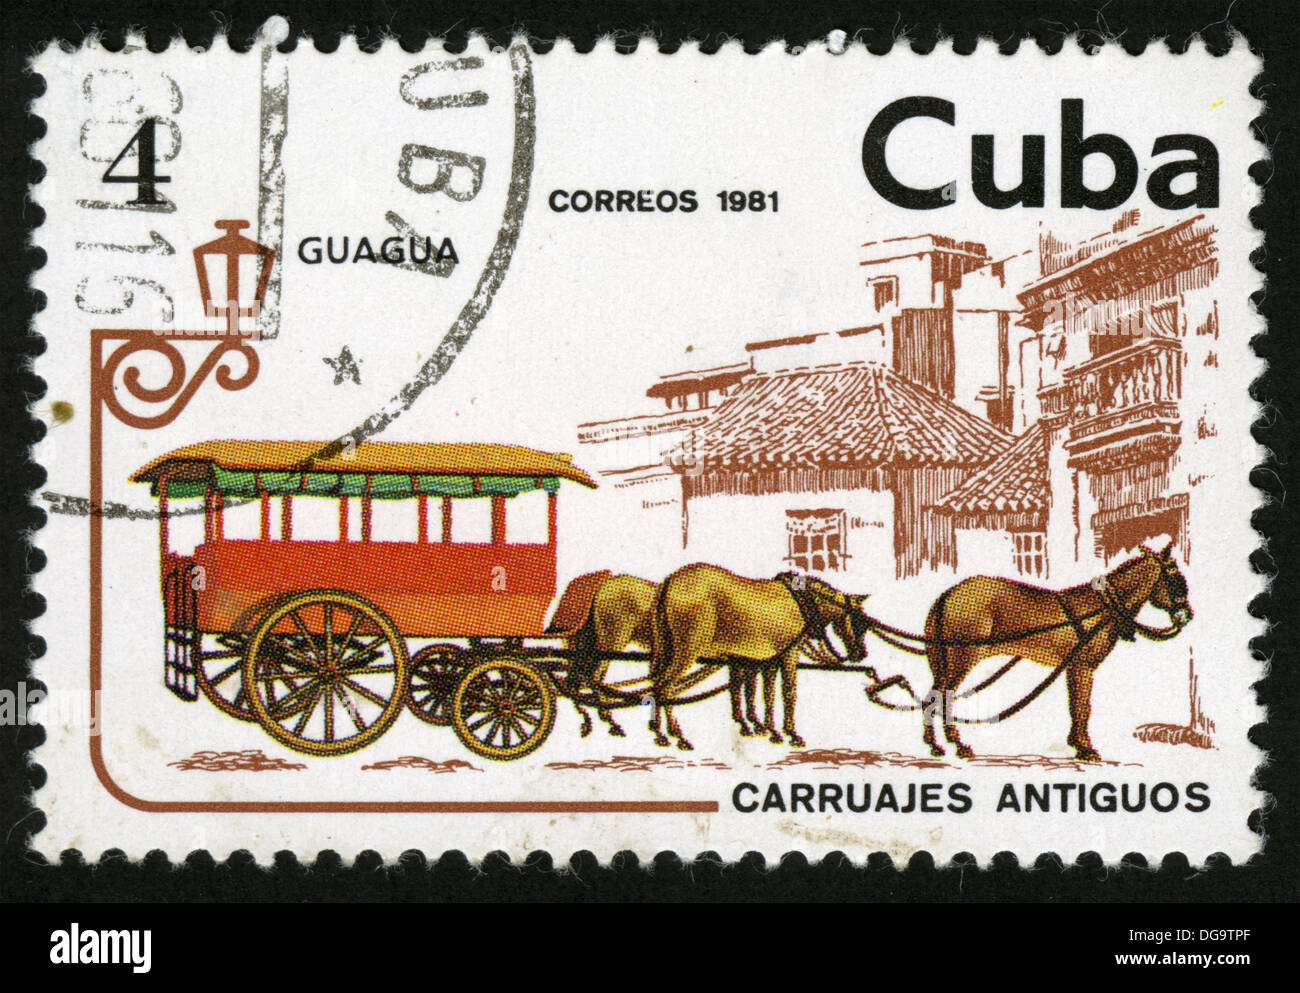 Cuba,1981 year,post mark,stamp,stagecoach Stock Photo